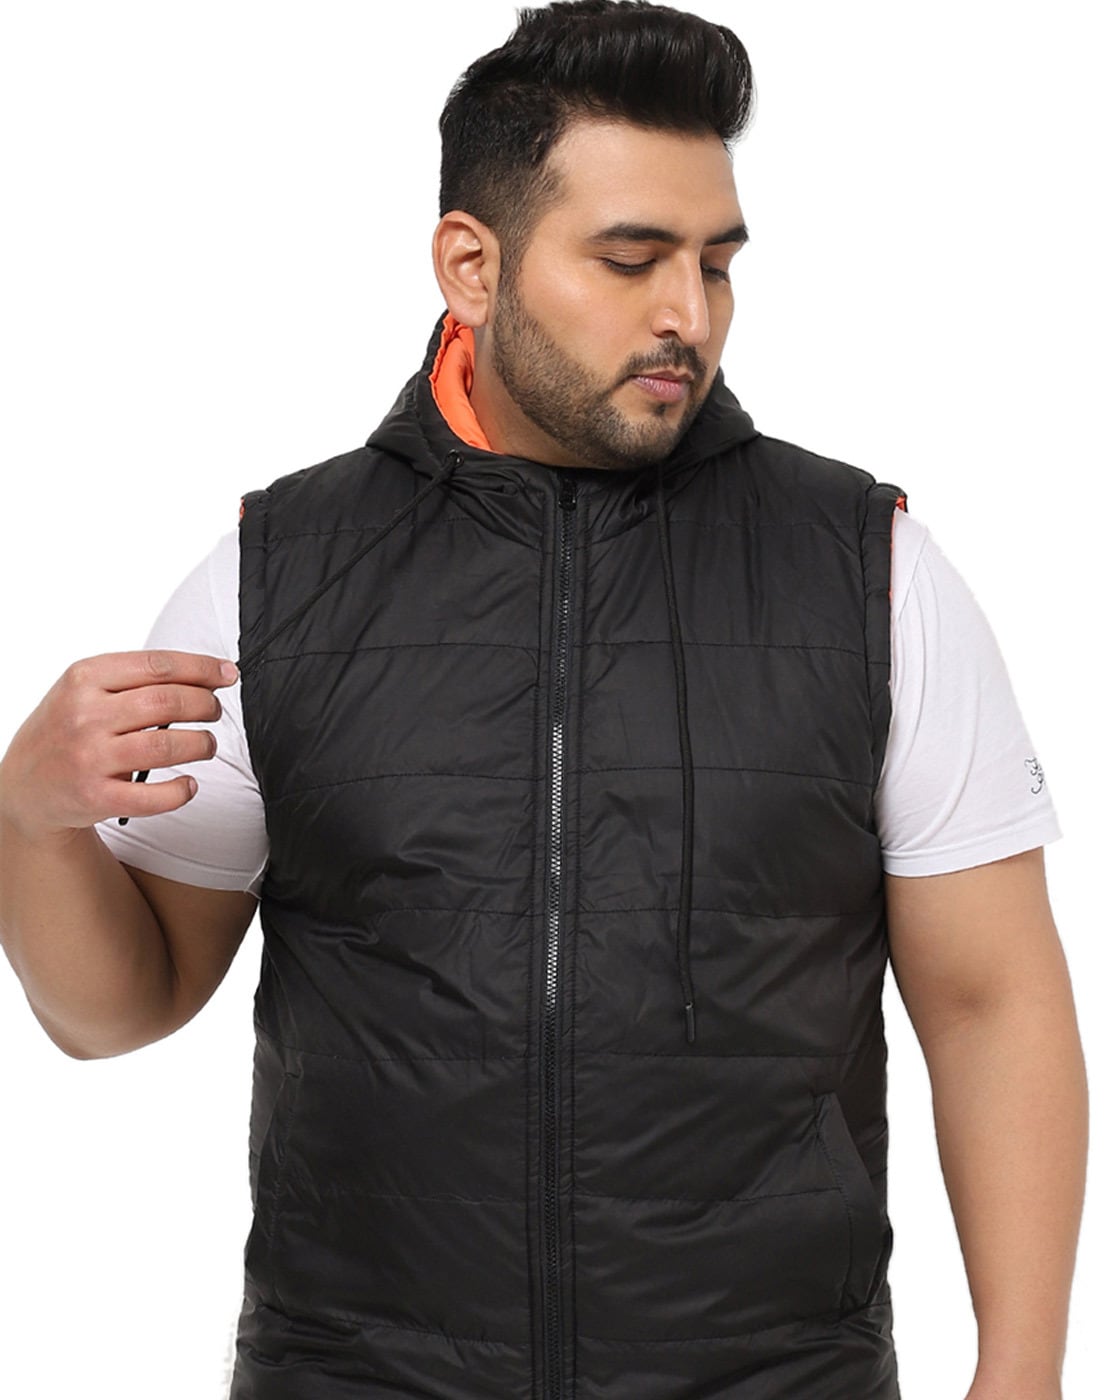 Sleeveless Patchwork Sheepskin Jacket for Men. Handmade Sheepskin Vest to  Keep You Warm and Stylish in Every Indoor or Outdoor Activity. - Etsy